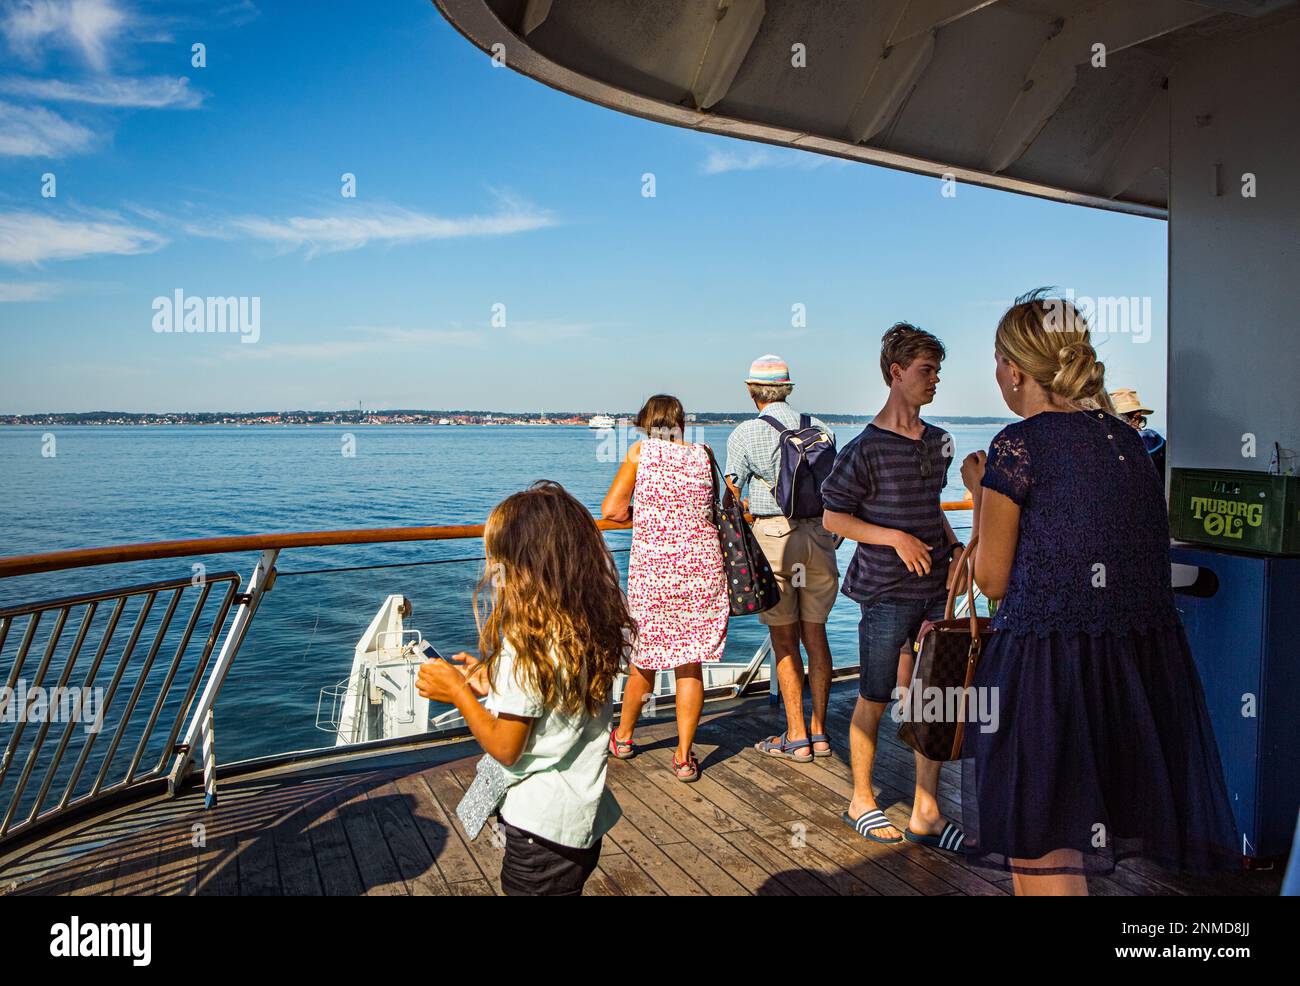 ELSINORE, DENMARK – 3 AUG 2018: Passengers on a ferry to the city of Elsinore in Denmark. Stock Photo